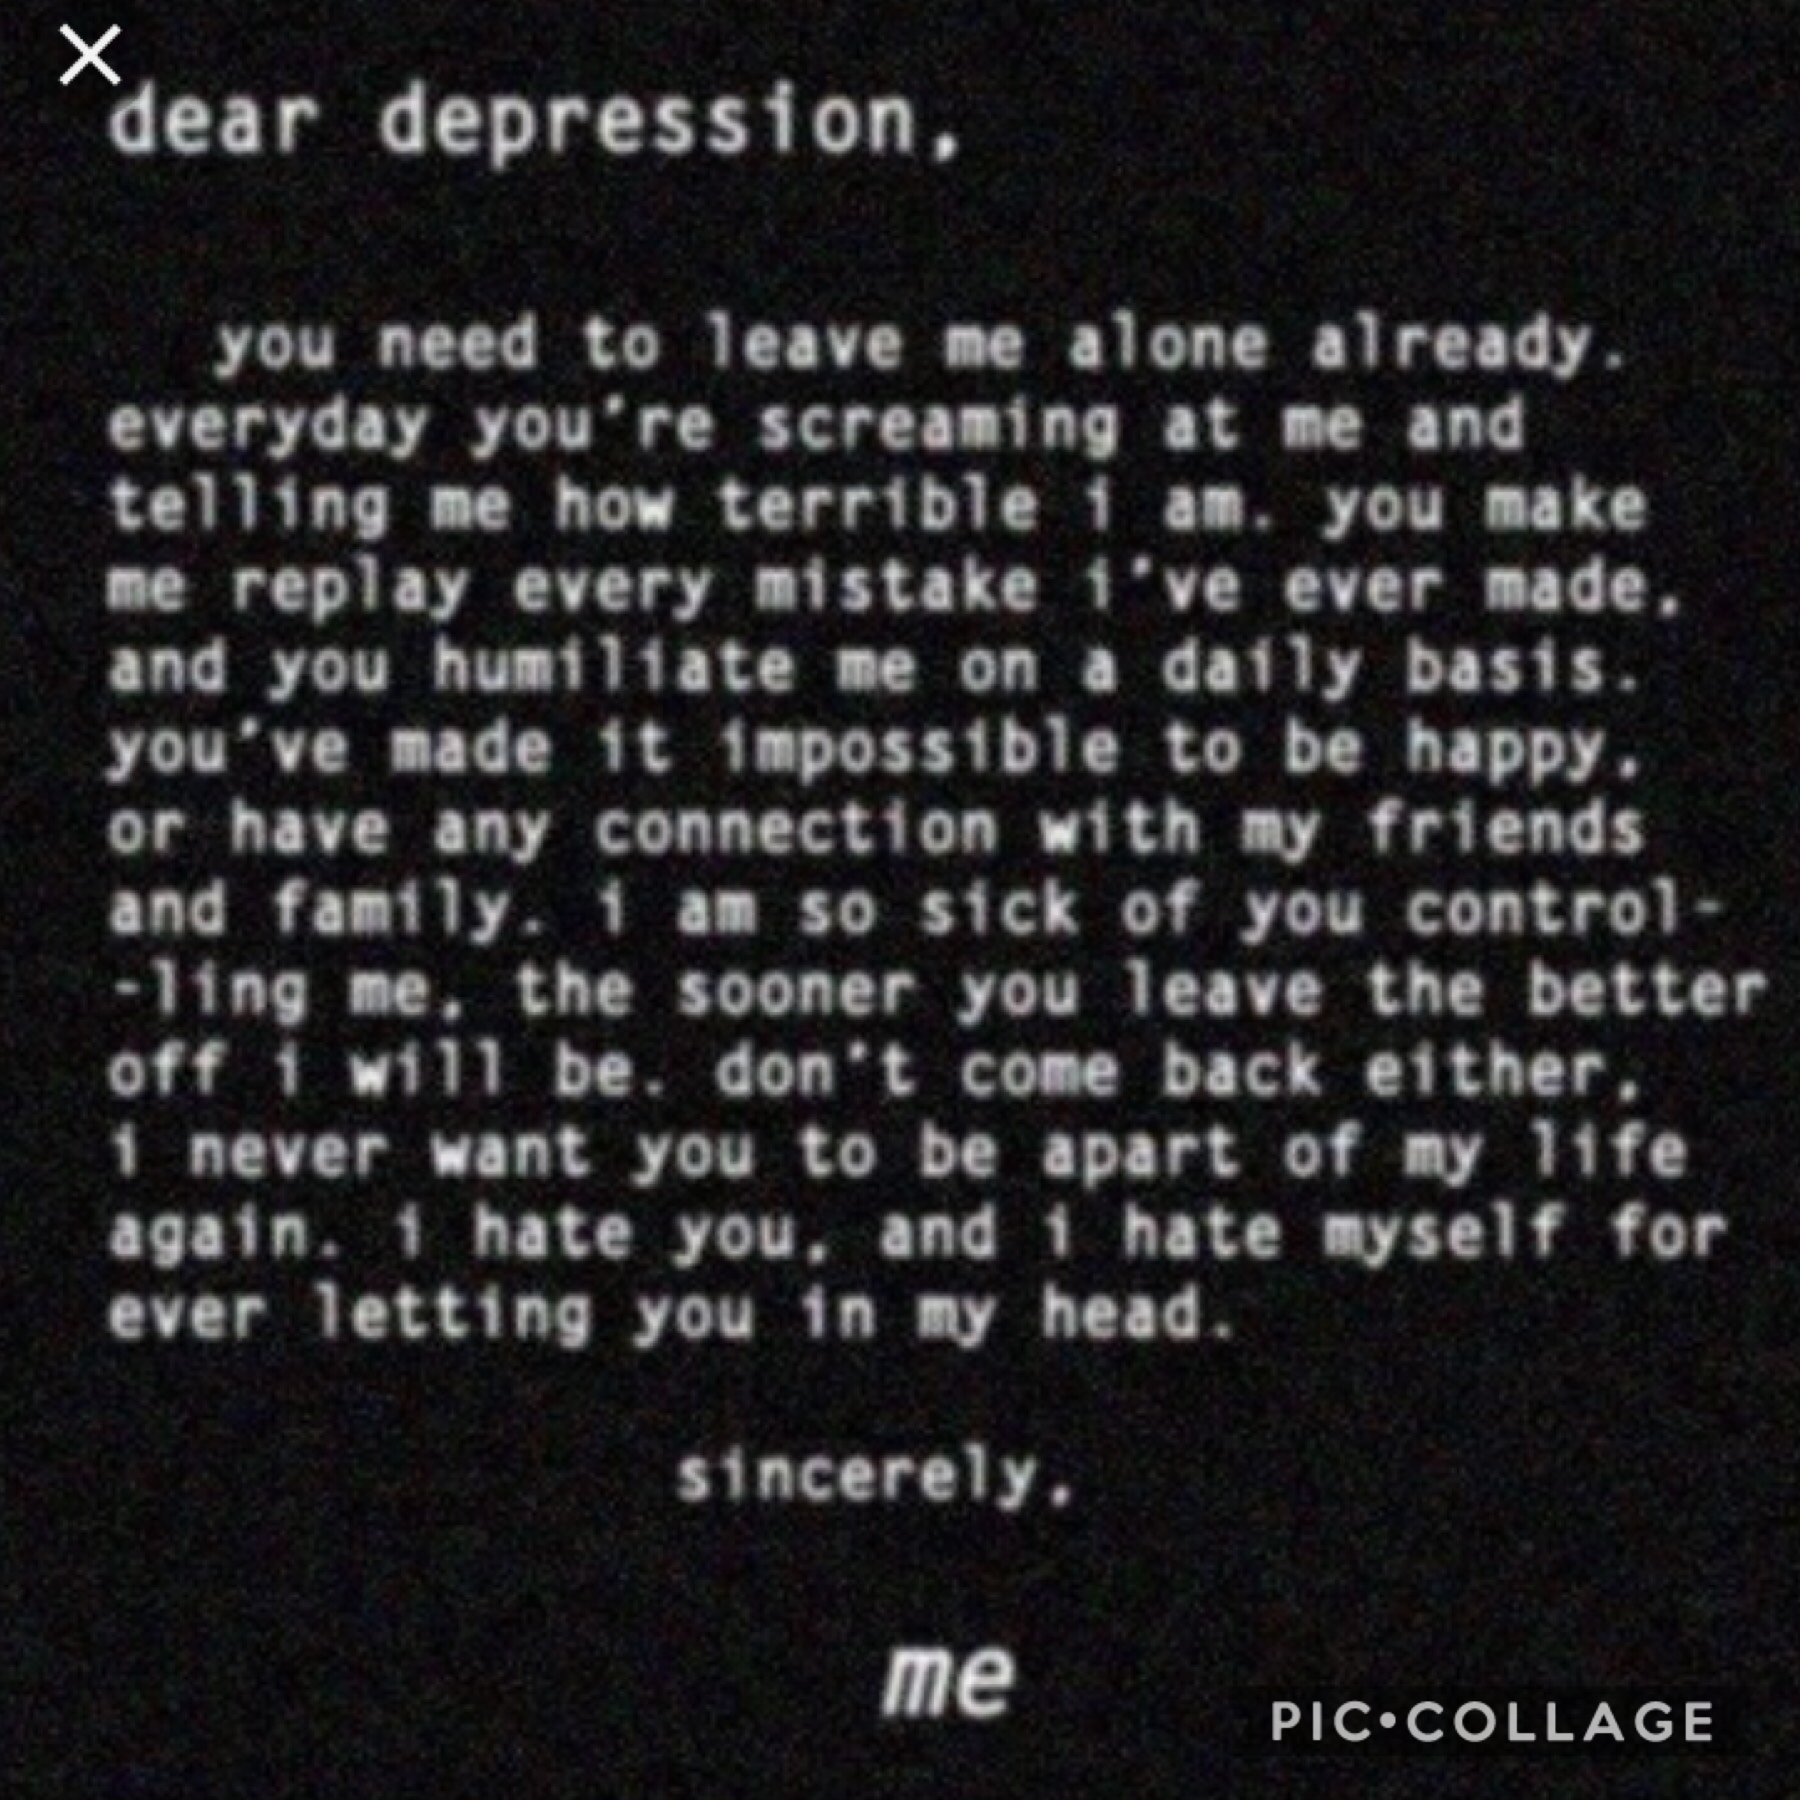 This is if you have depression 